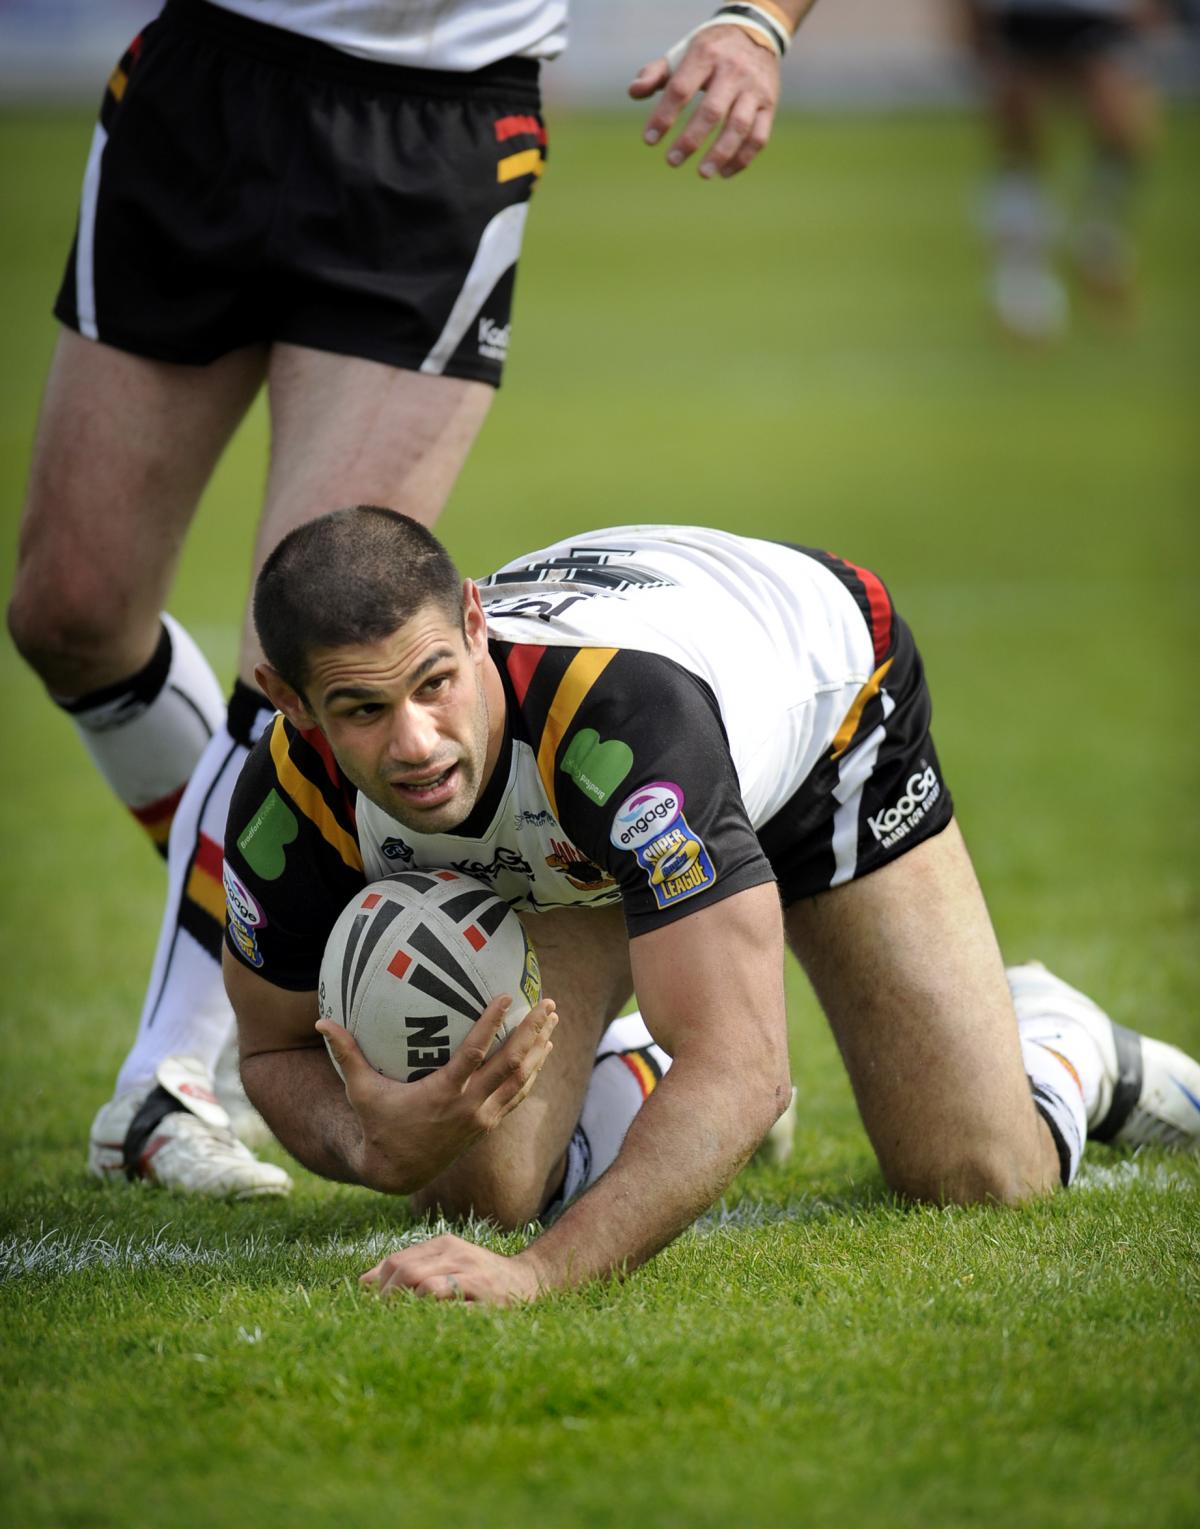 Match pictures from Bulls' game against Wakefield Wildcats